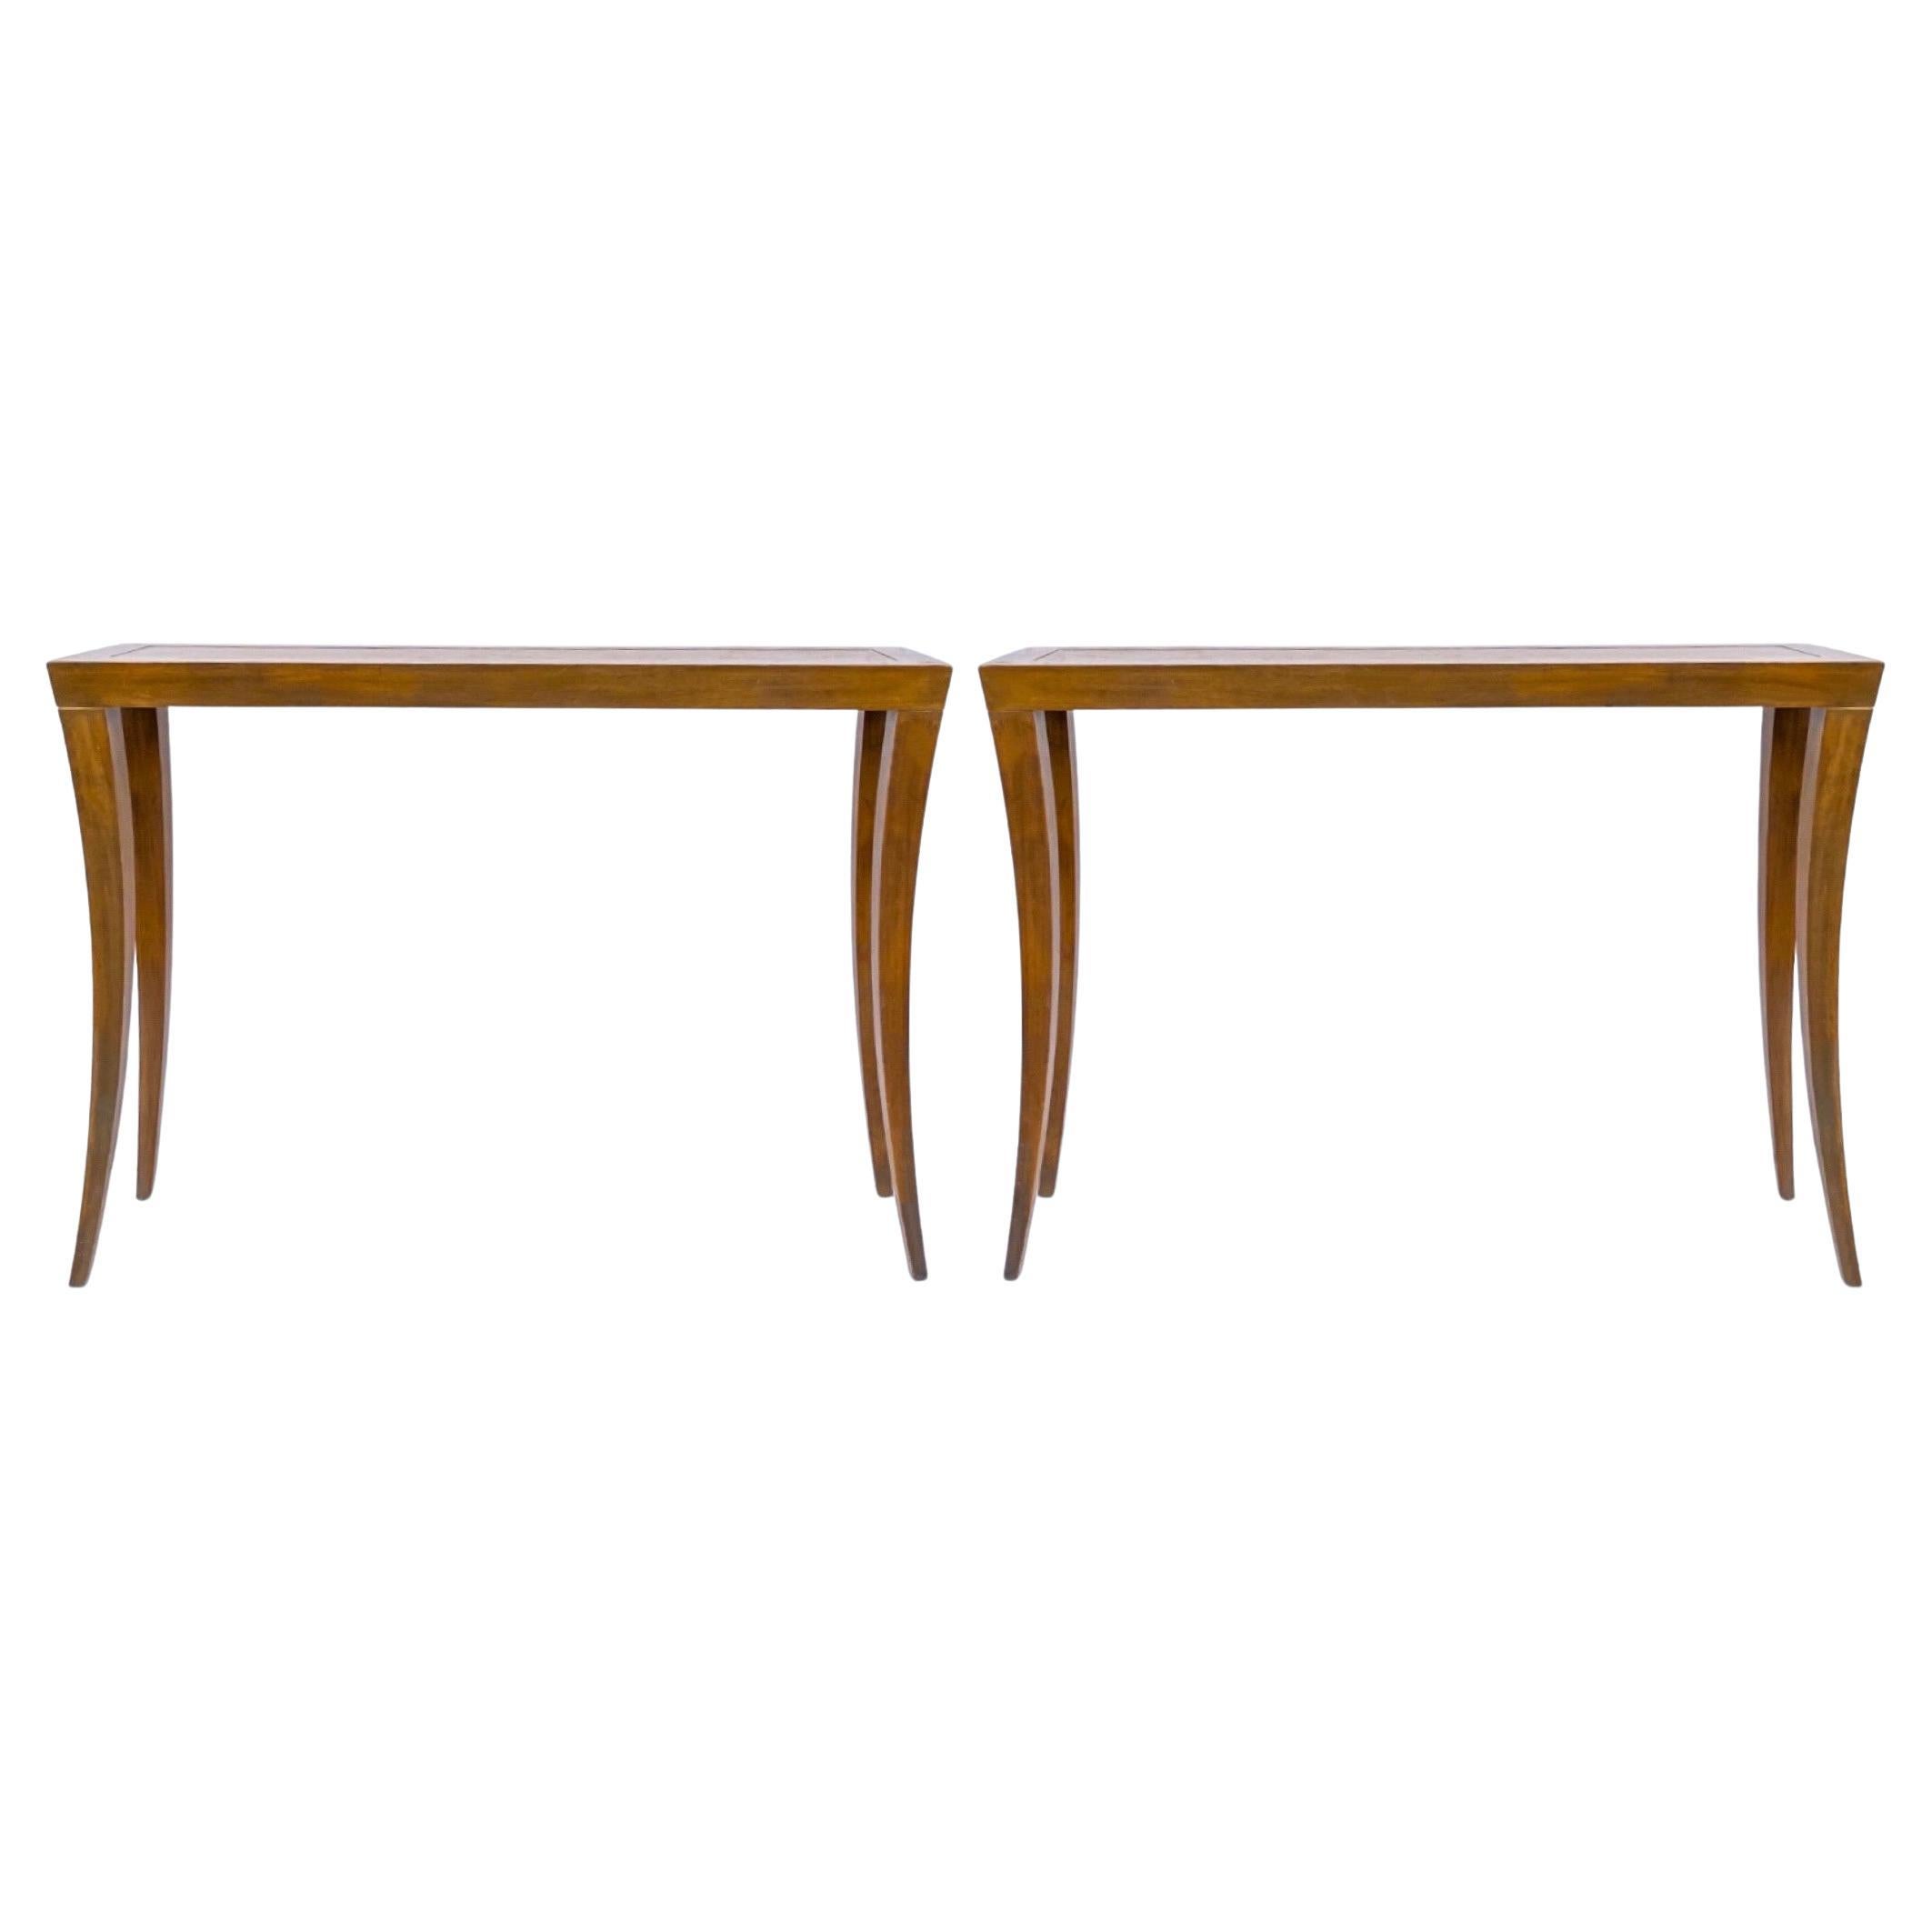 Late 20th-C. Modern Saber Leg Mahogany Console Tables by Hickory Chair, Pair